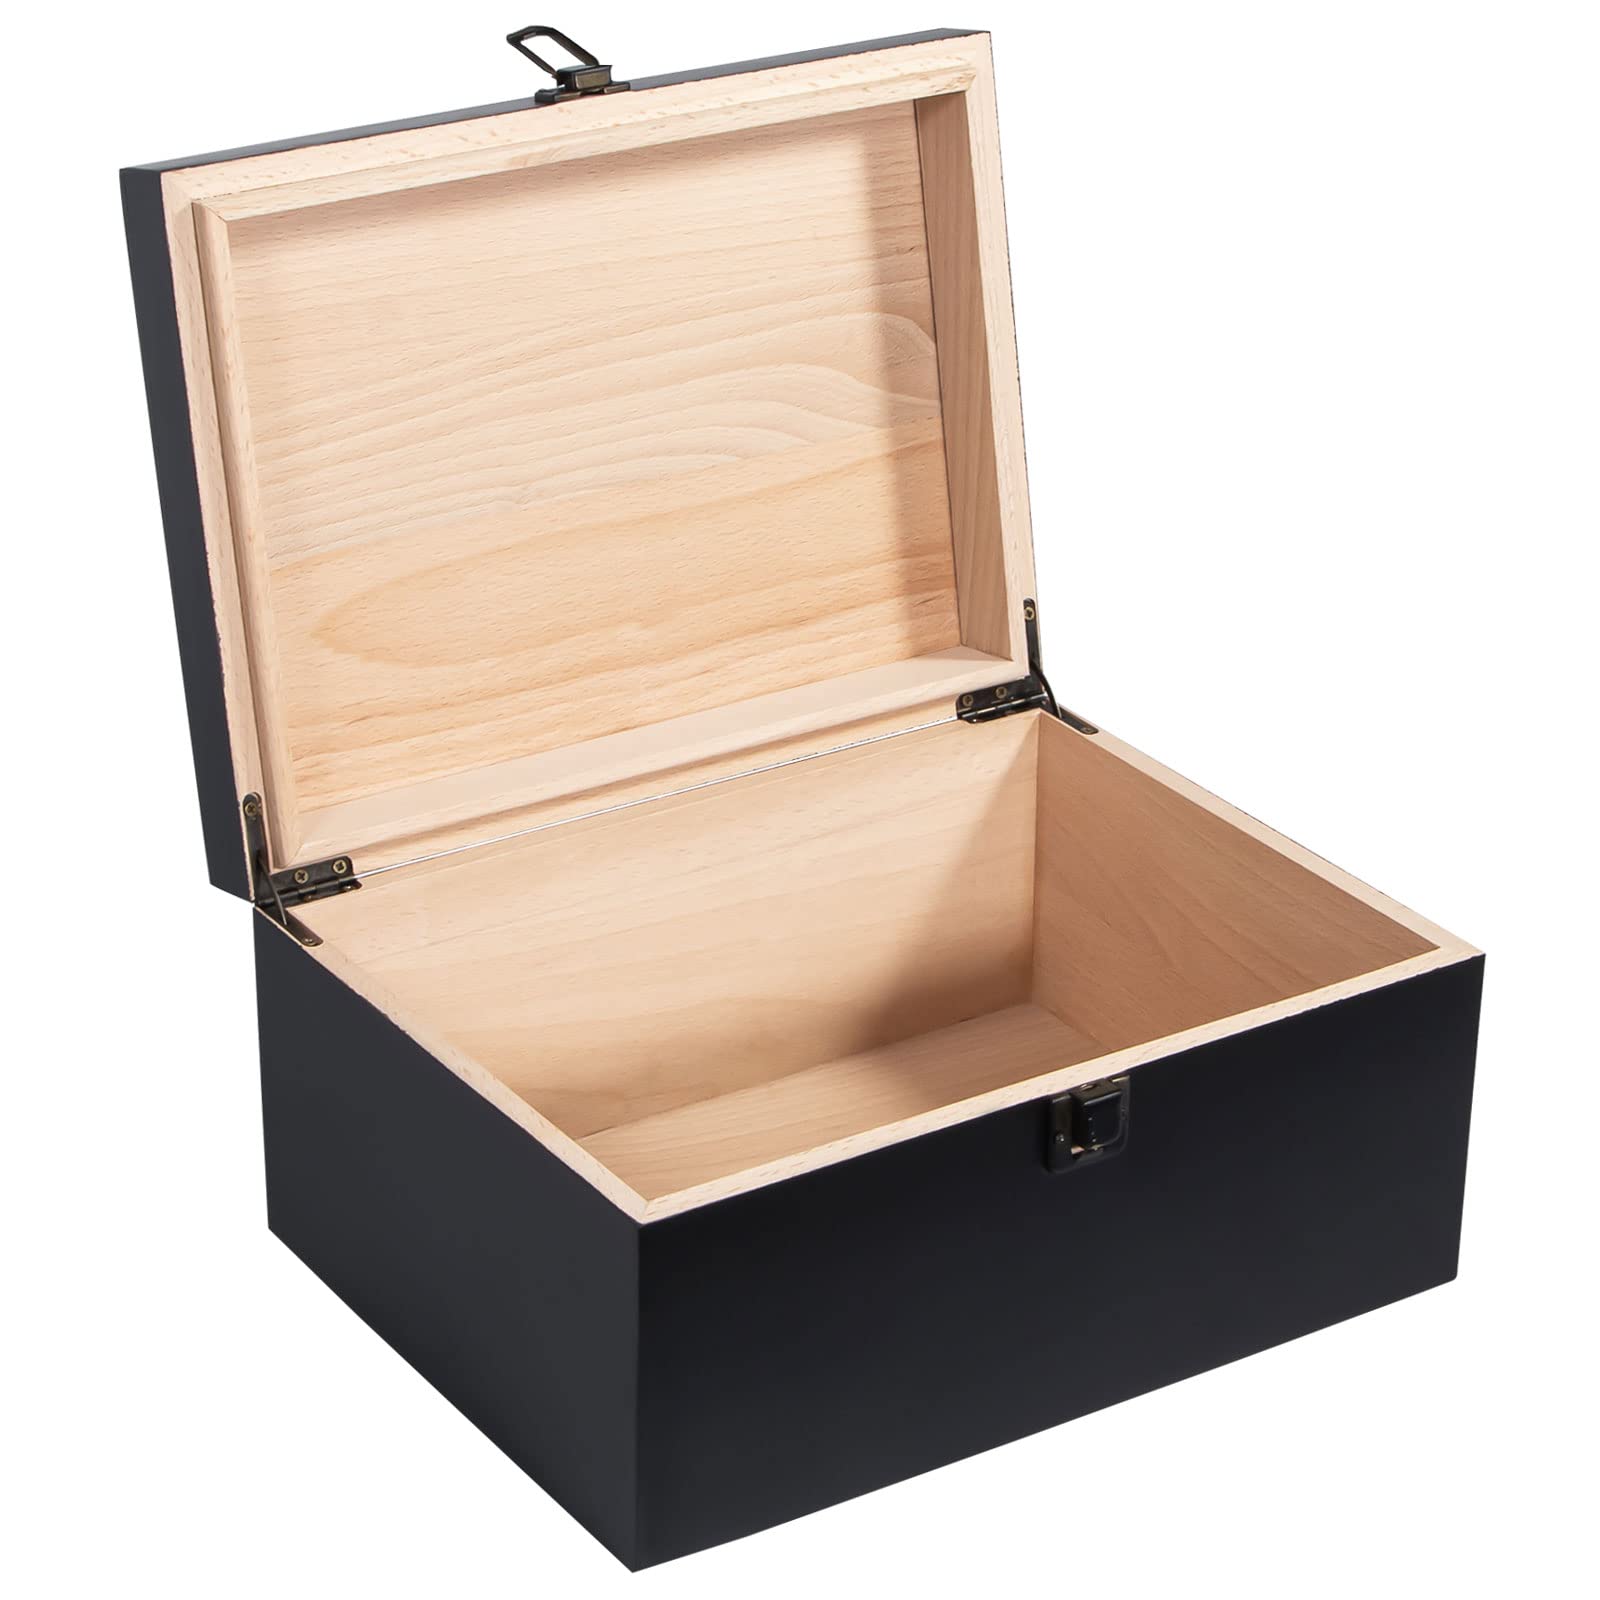 Why You Should Use Wooden Storage Boxes 65681 - Why You Should Use Wooden Storage Boxes